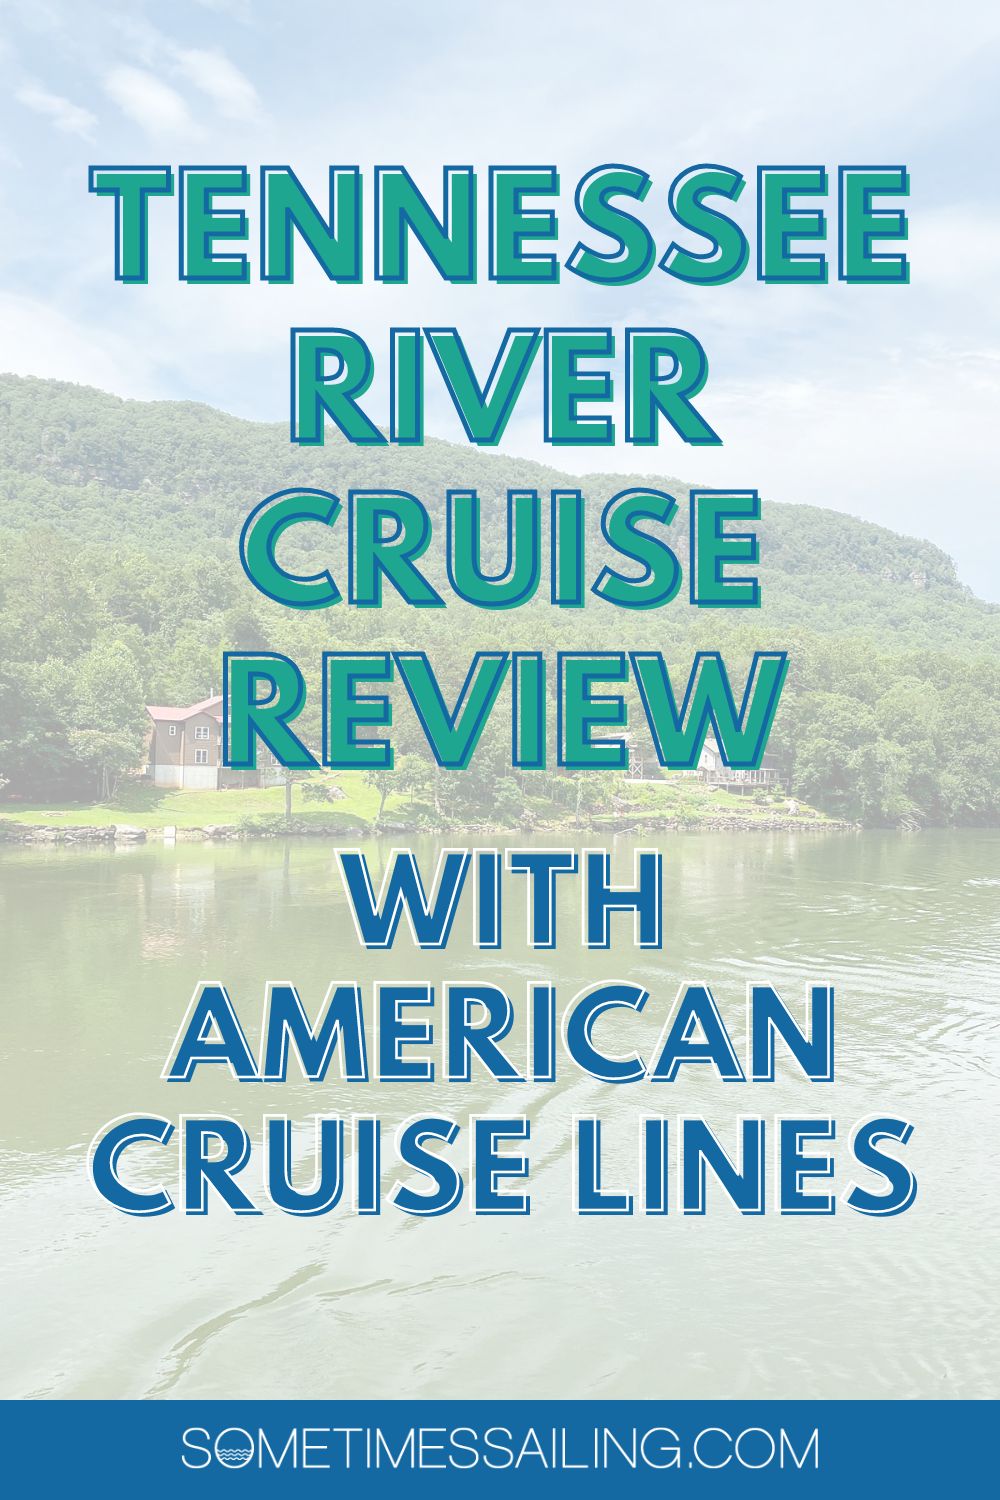 Tennessee River Cruise Review with American Cruise Lines with a faded photo of the river in the background. Tennessee River Cruise Review with American Cruise Lines with a faded photo of the river in the background.